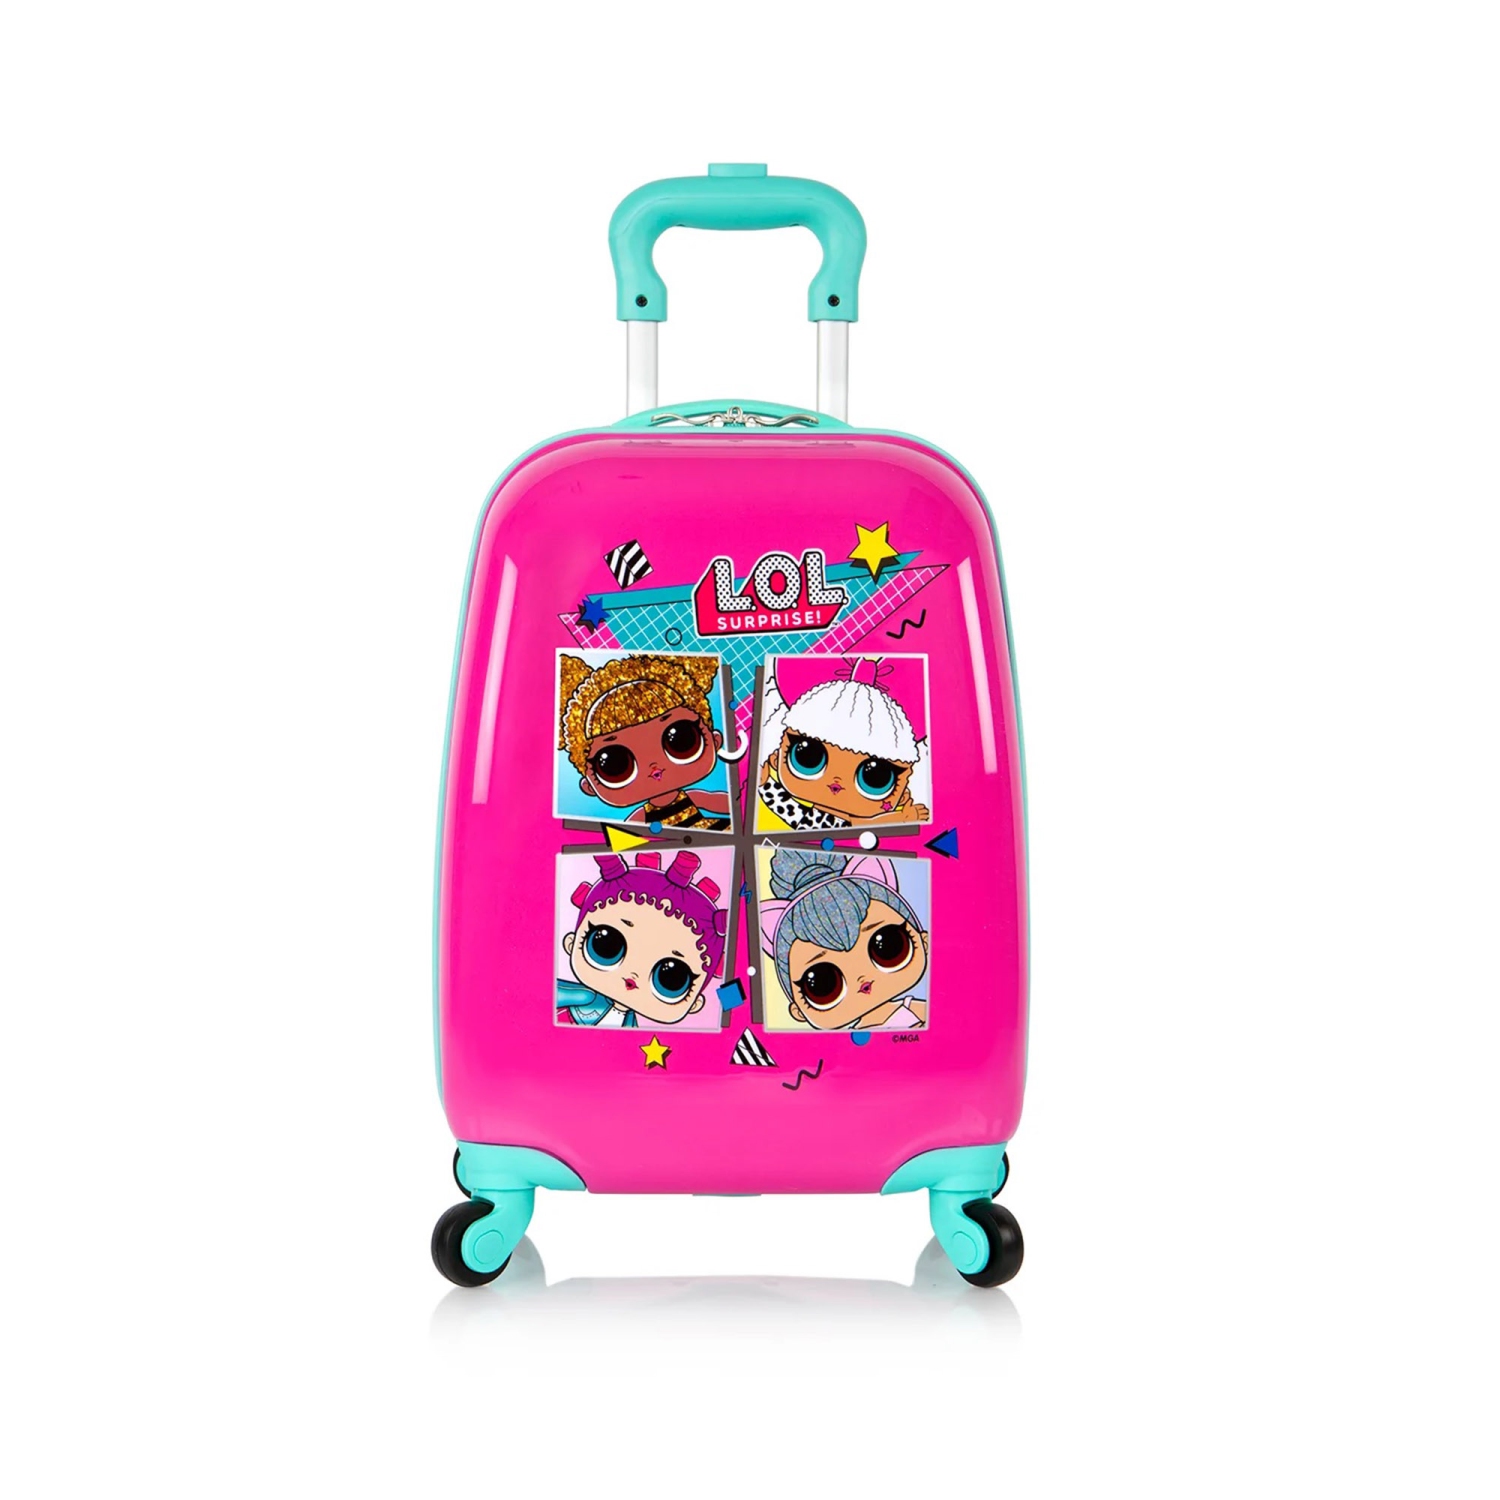 Lol Surprise Kids Hardside Luggage - 18 Inch Spinner Rolling Suitcase Travel Trolley for Kids